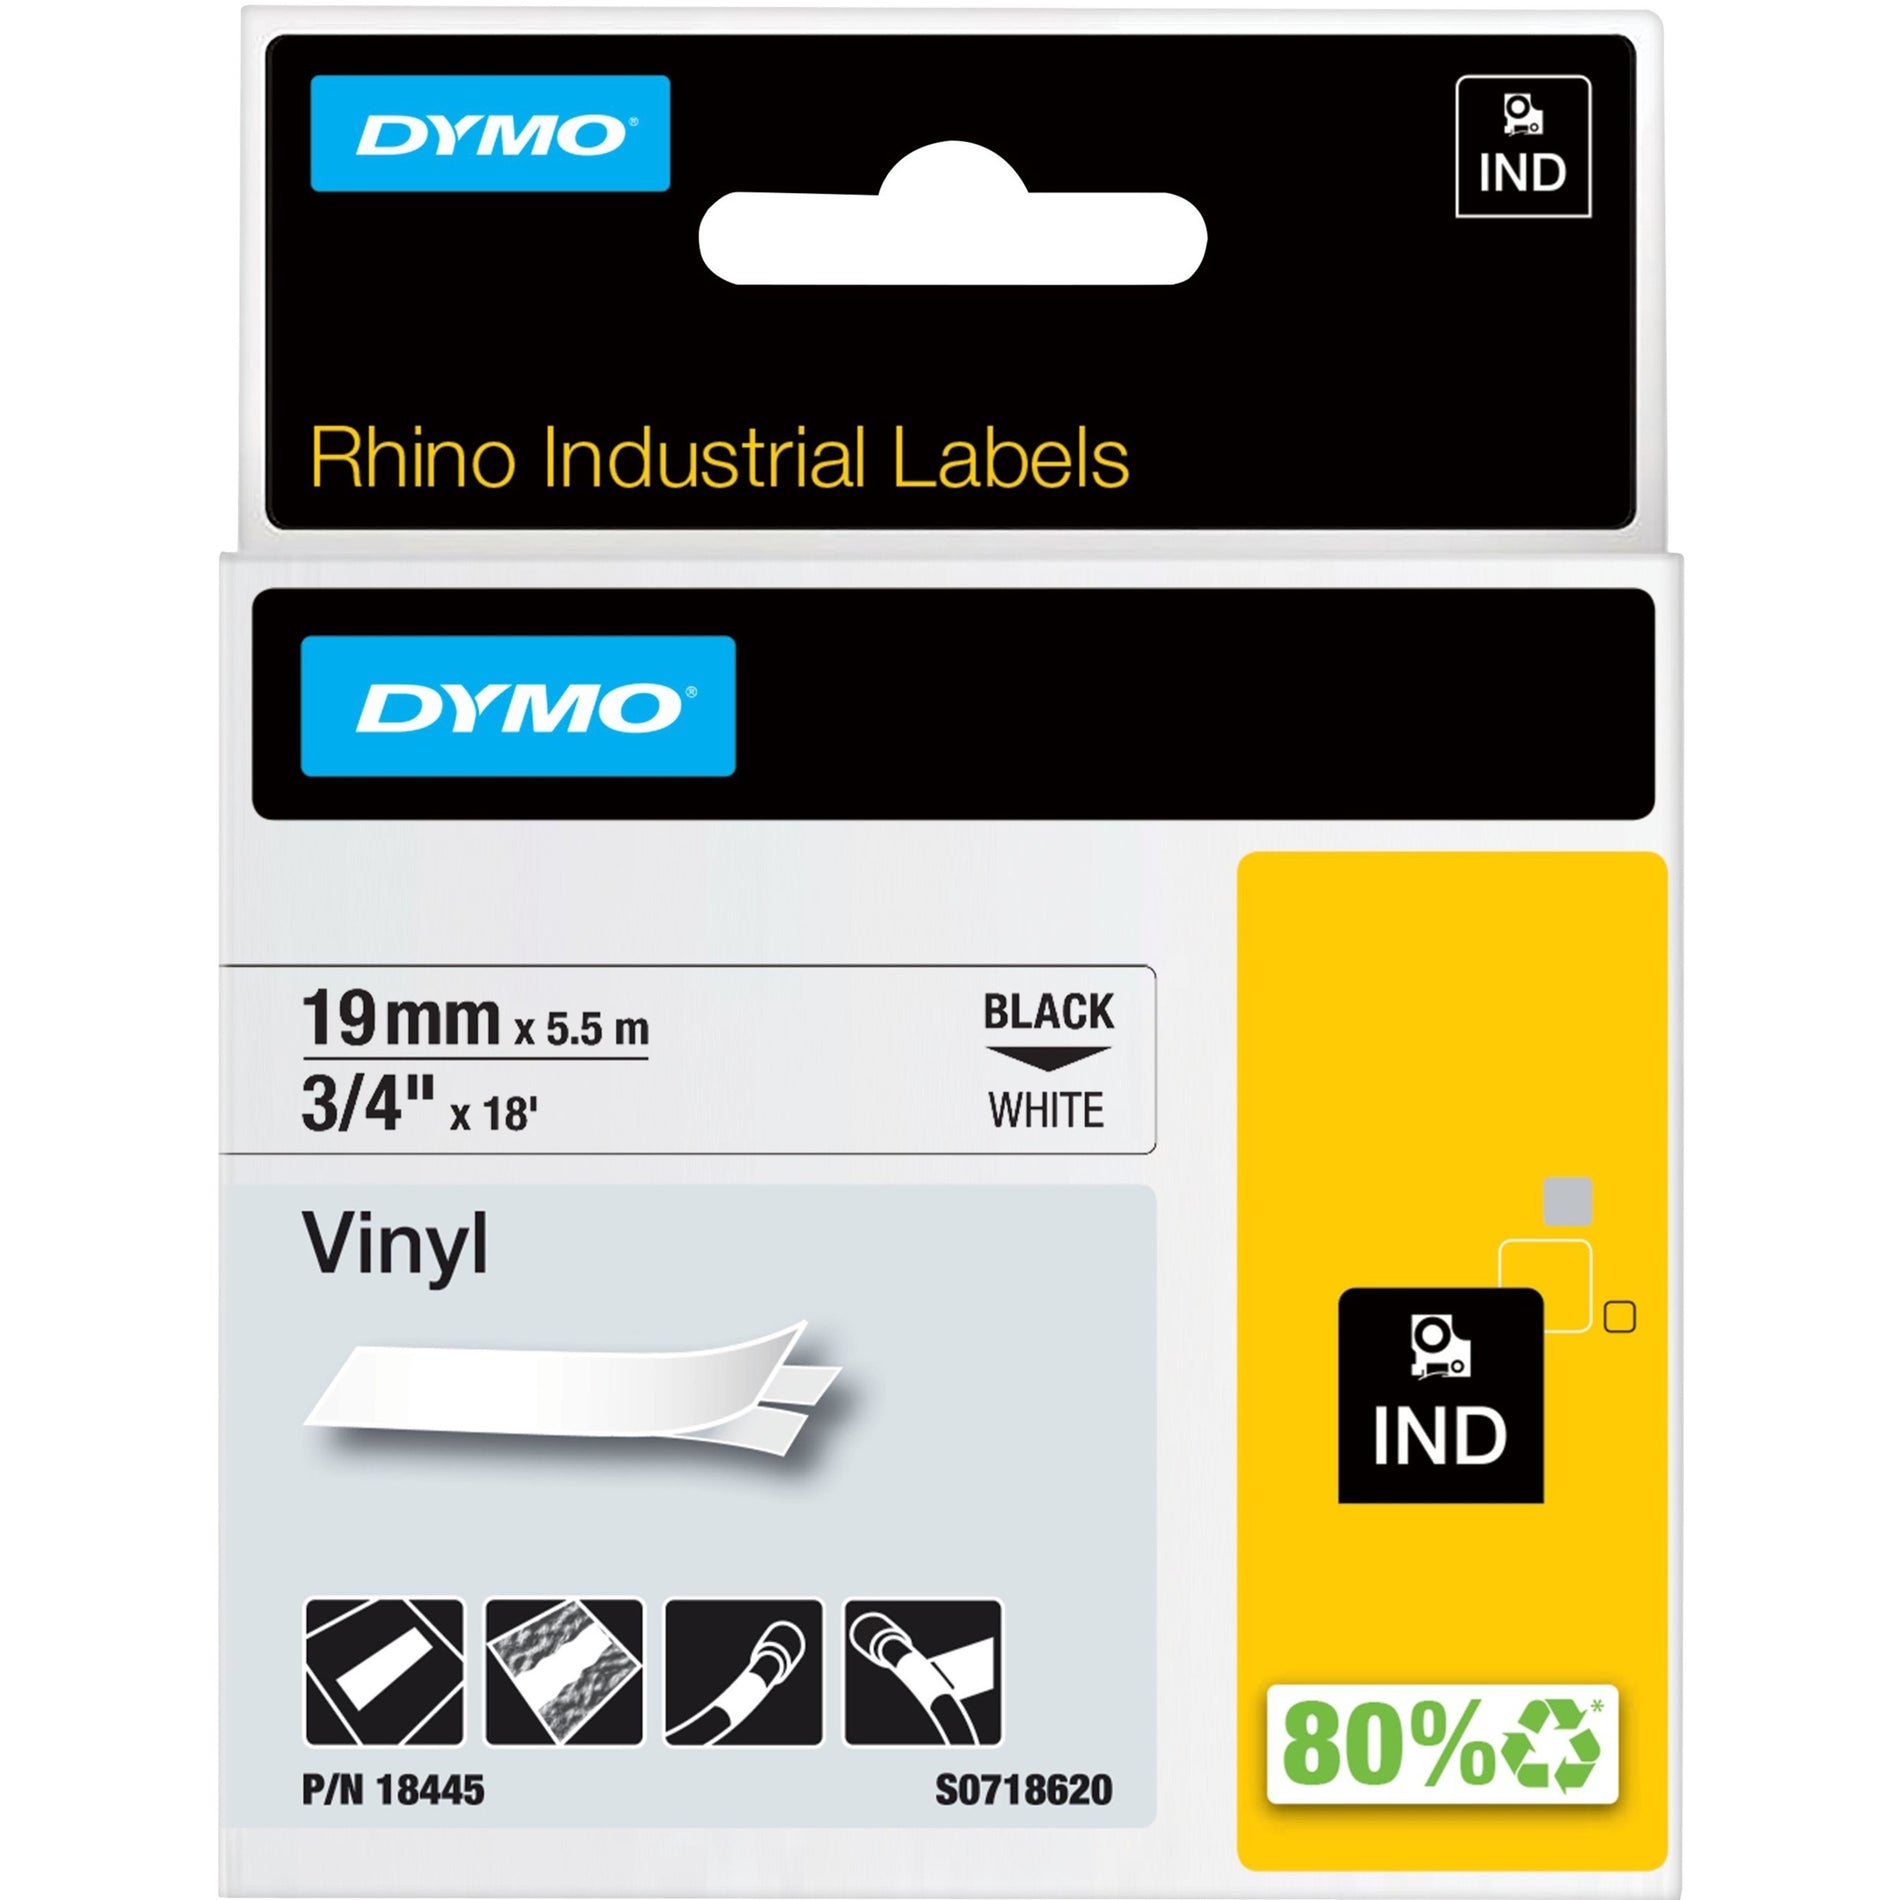 Dymo 18445 colored Vinyl Label Tape, 3/4" x 18 ft, Black on White, Chemical Resistant